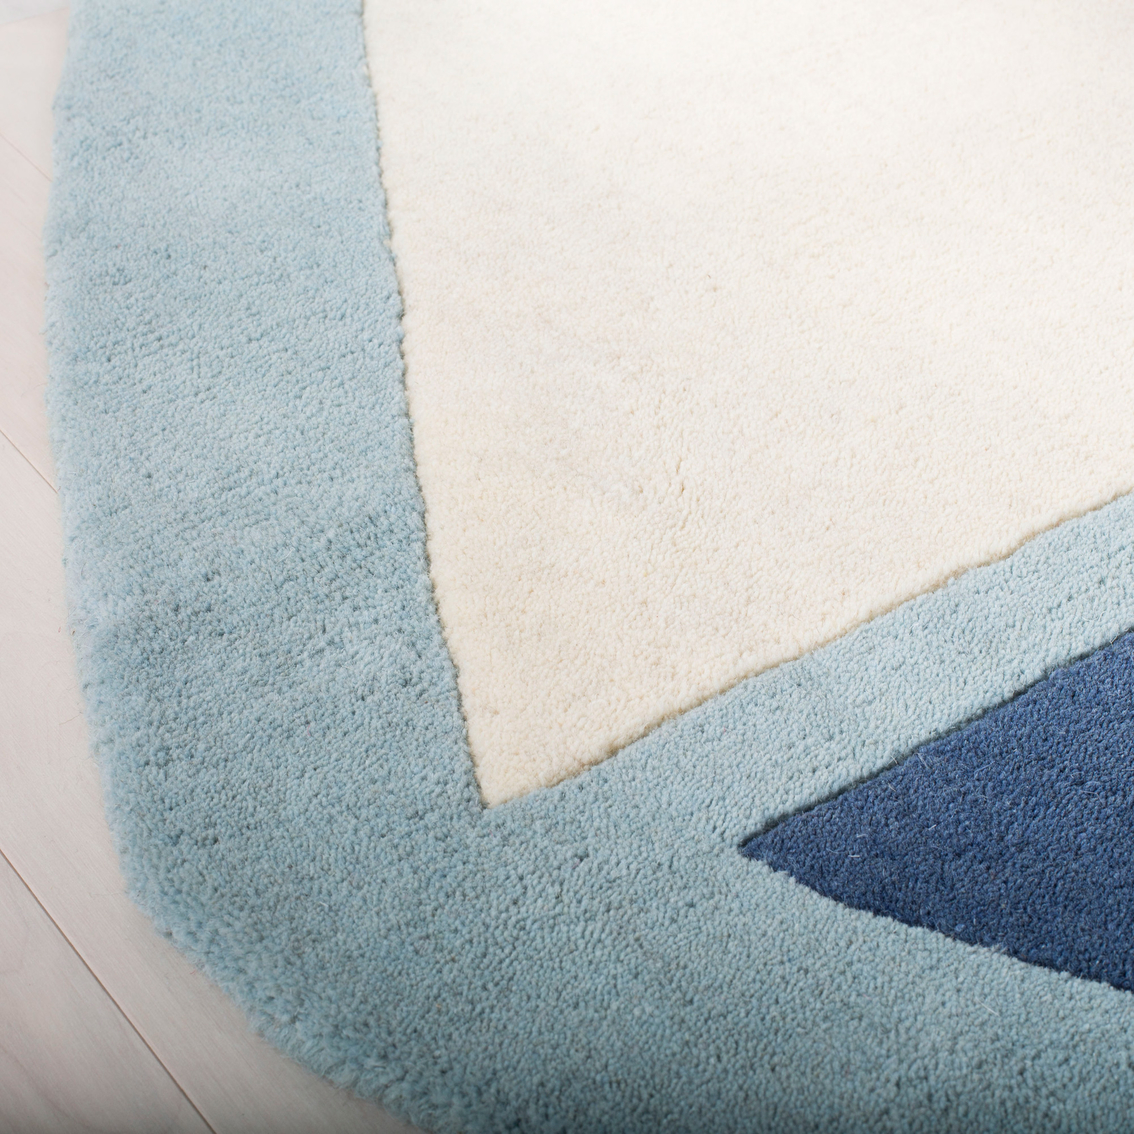 Martha Stewart Collection Boat Area Rug - Image 2 of 2